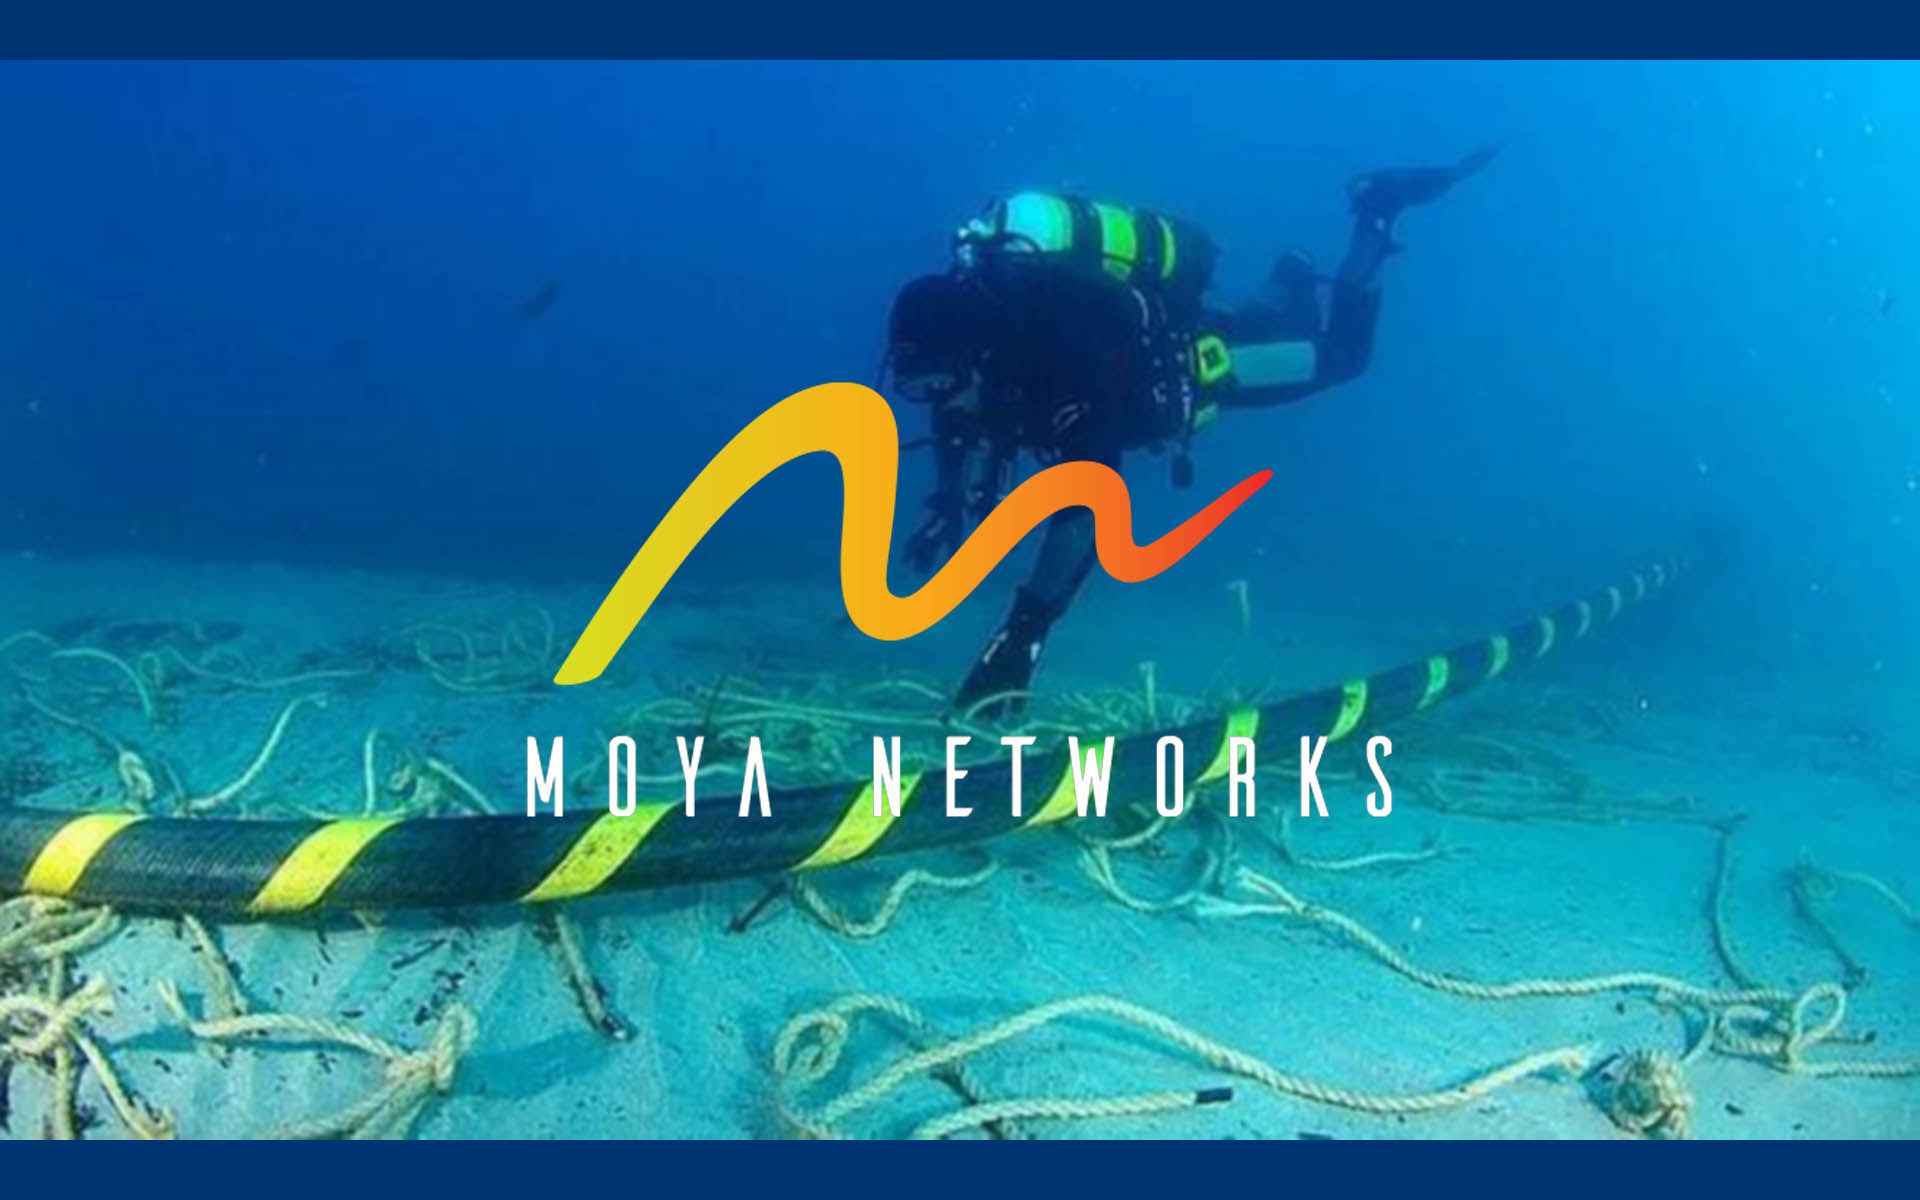 Moya Networks – Africa’s Underwater Internet Cable Revolution in the Works via Blockchain?